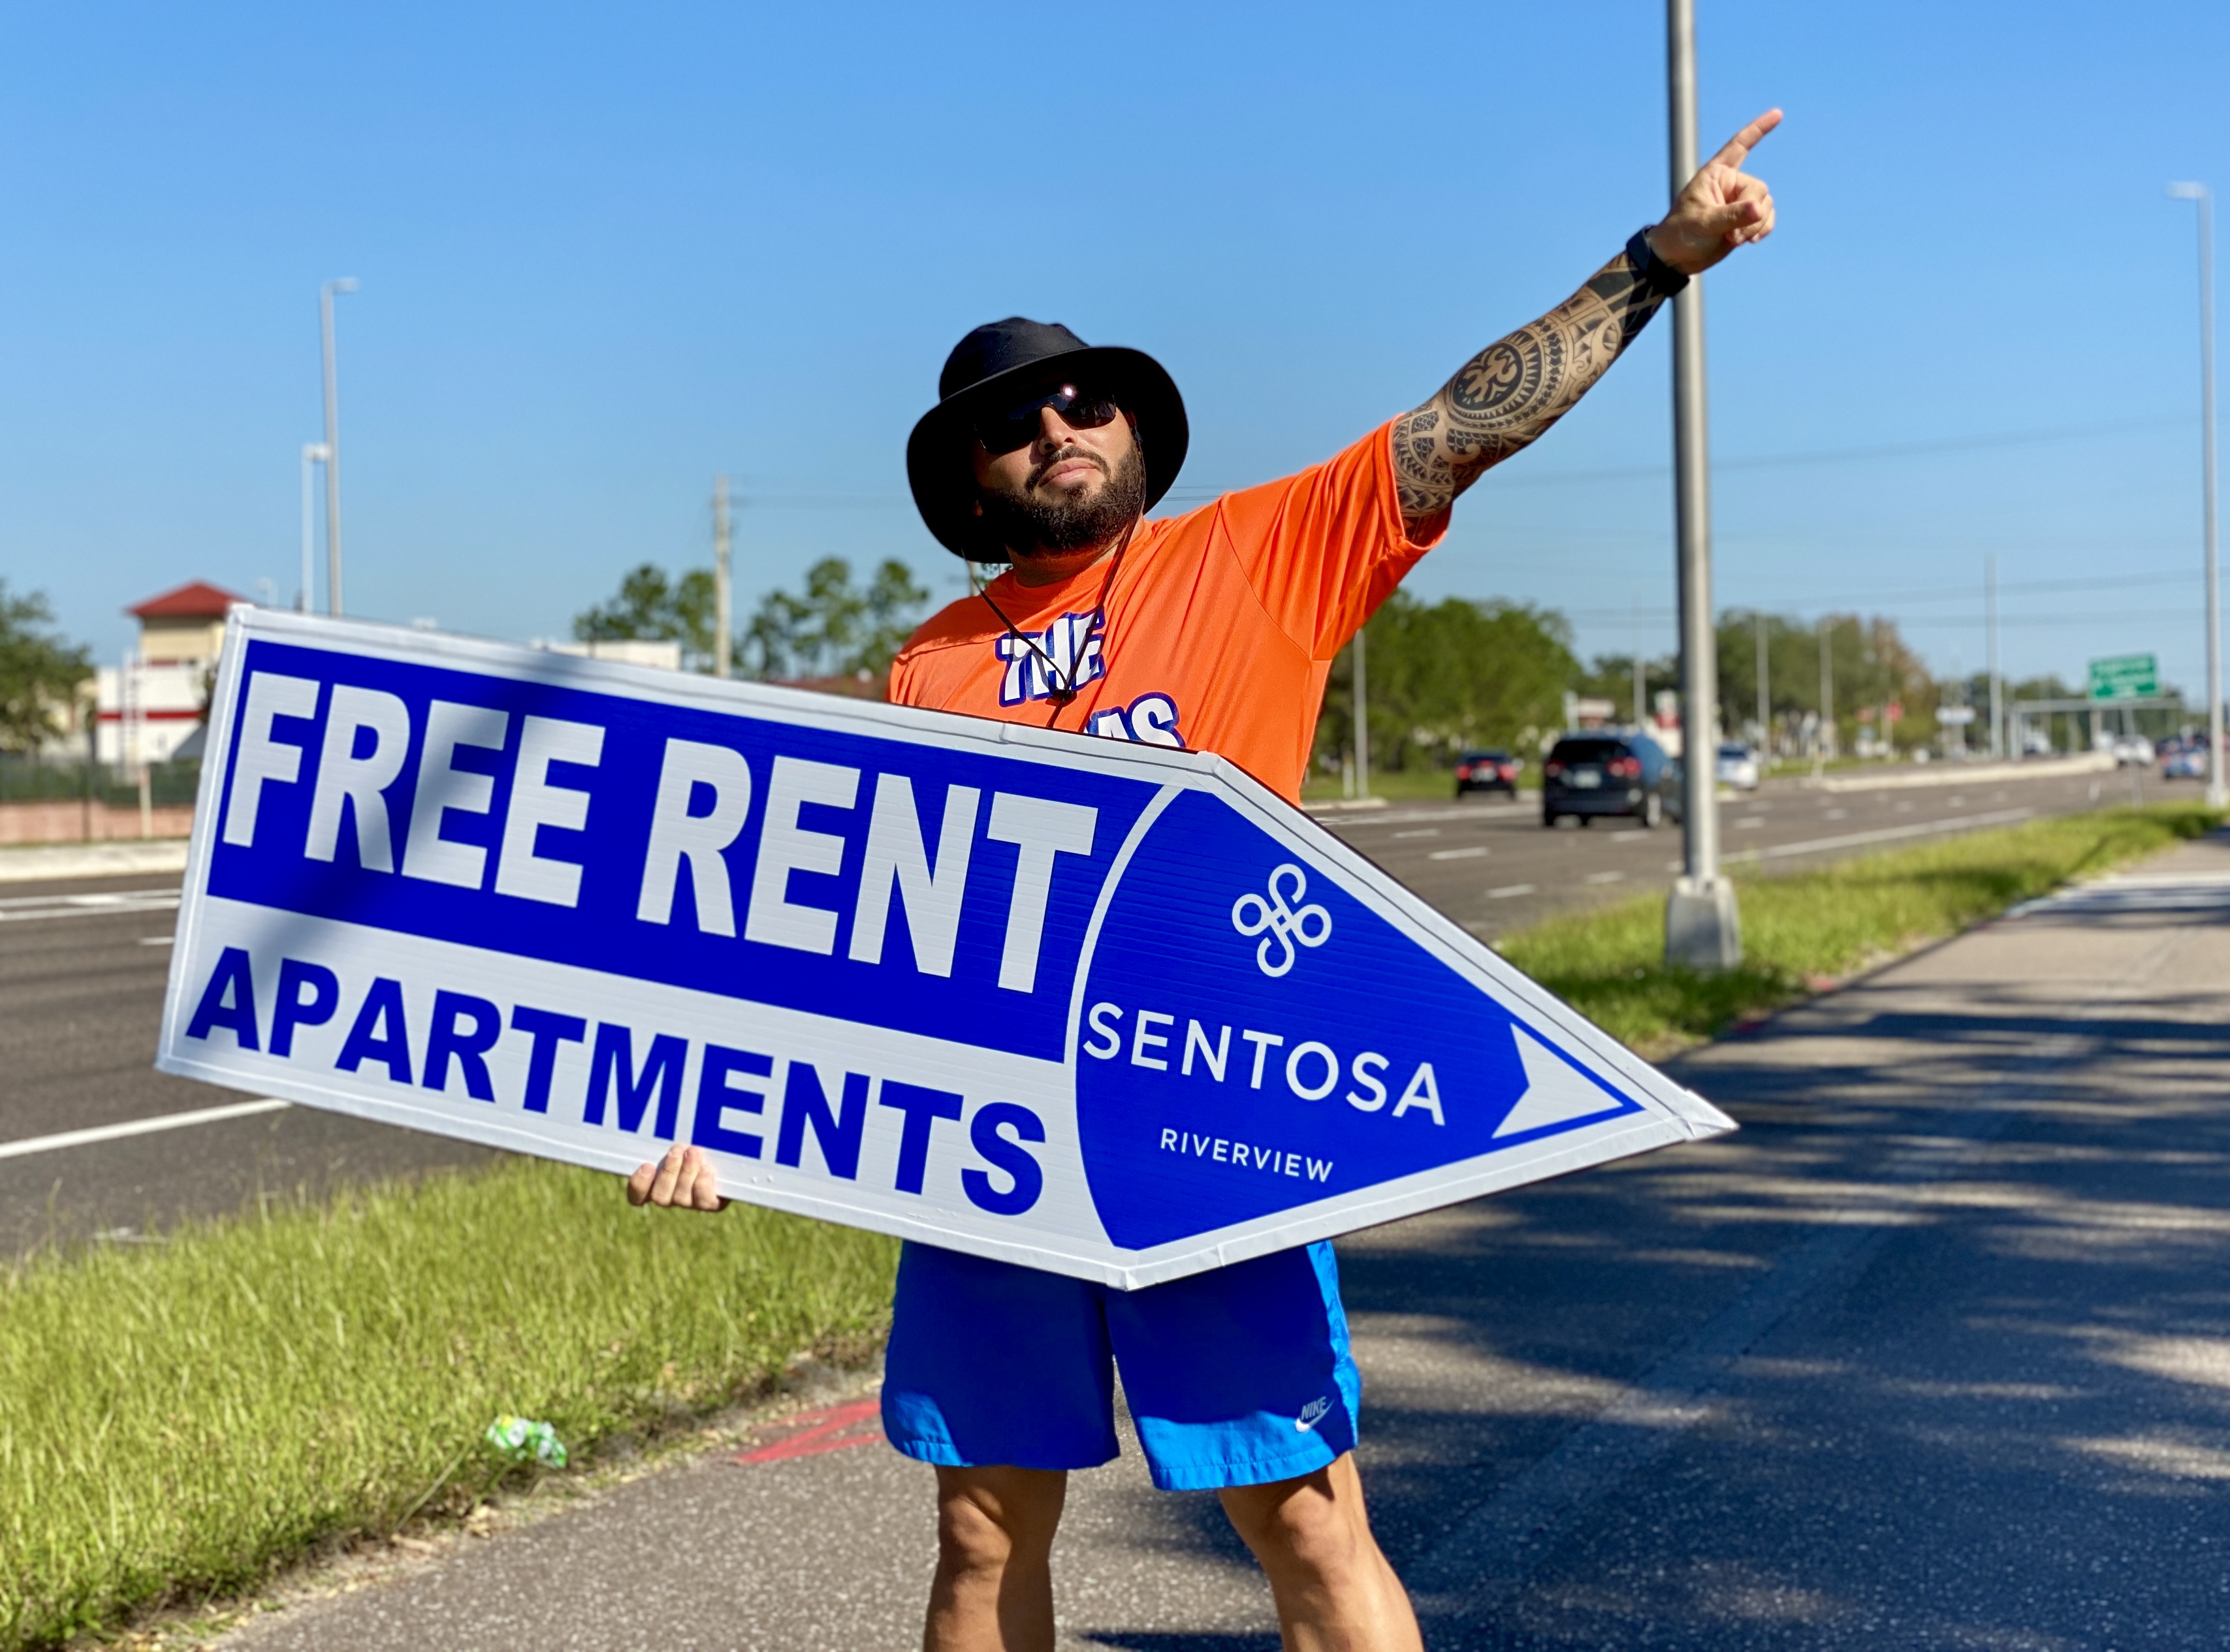 The Sign Spinners in Sarasota FL for Sentosa Apartments